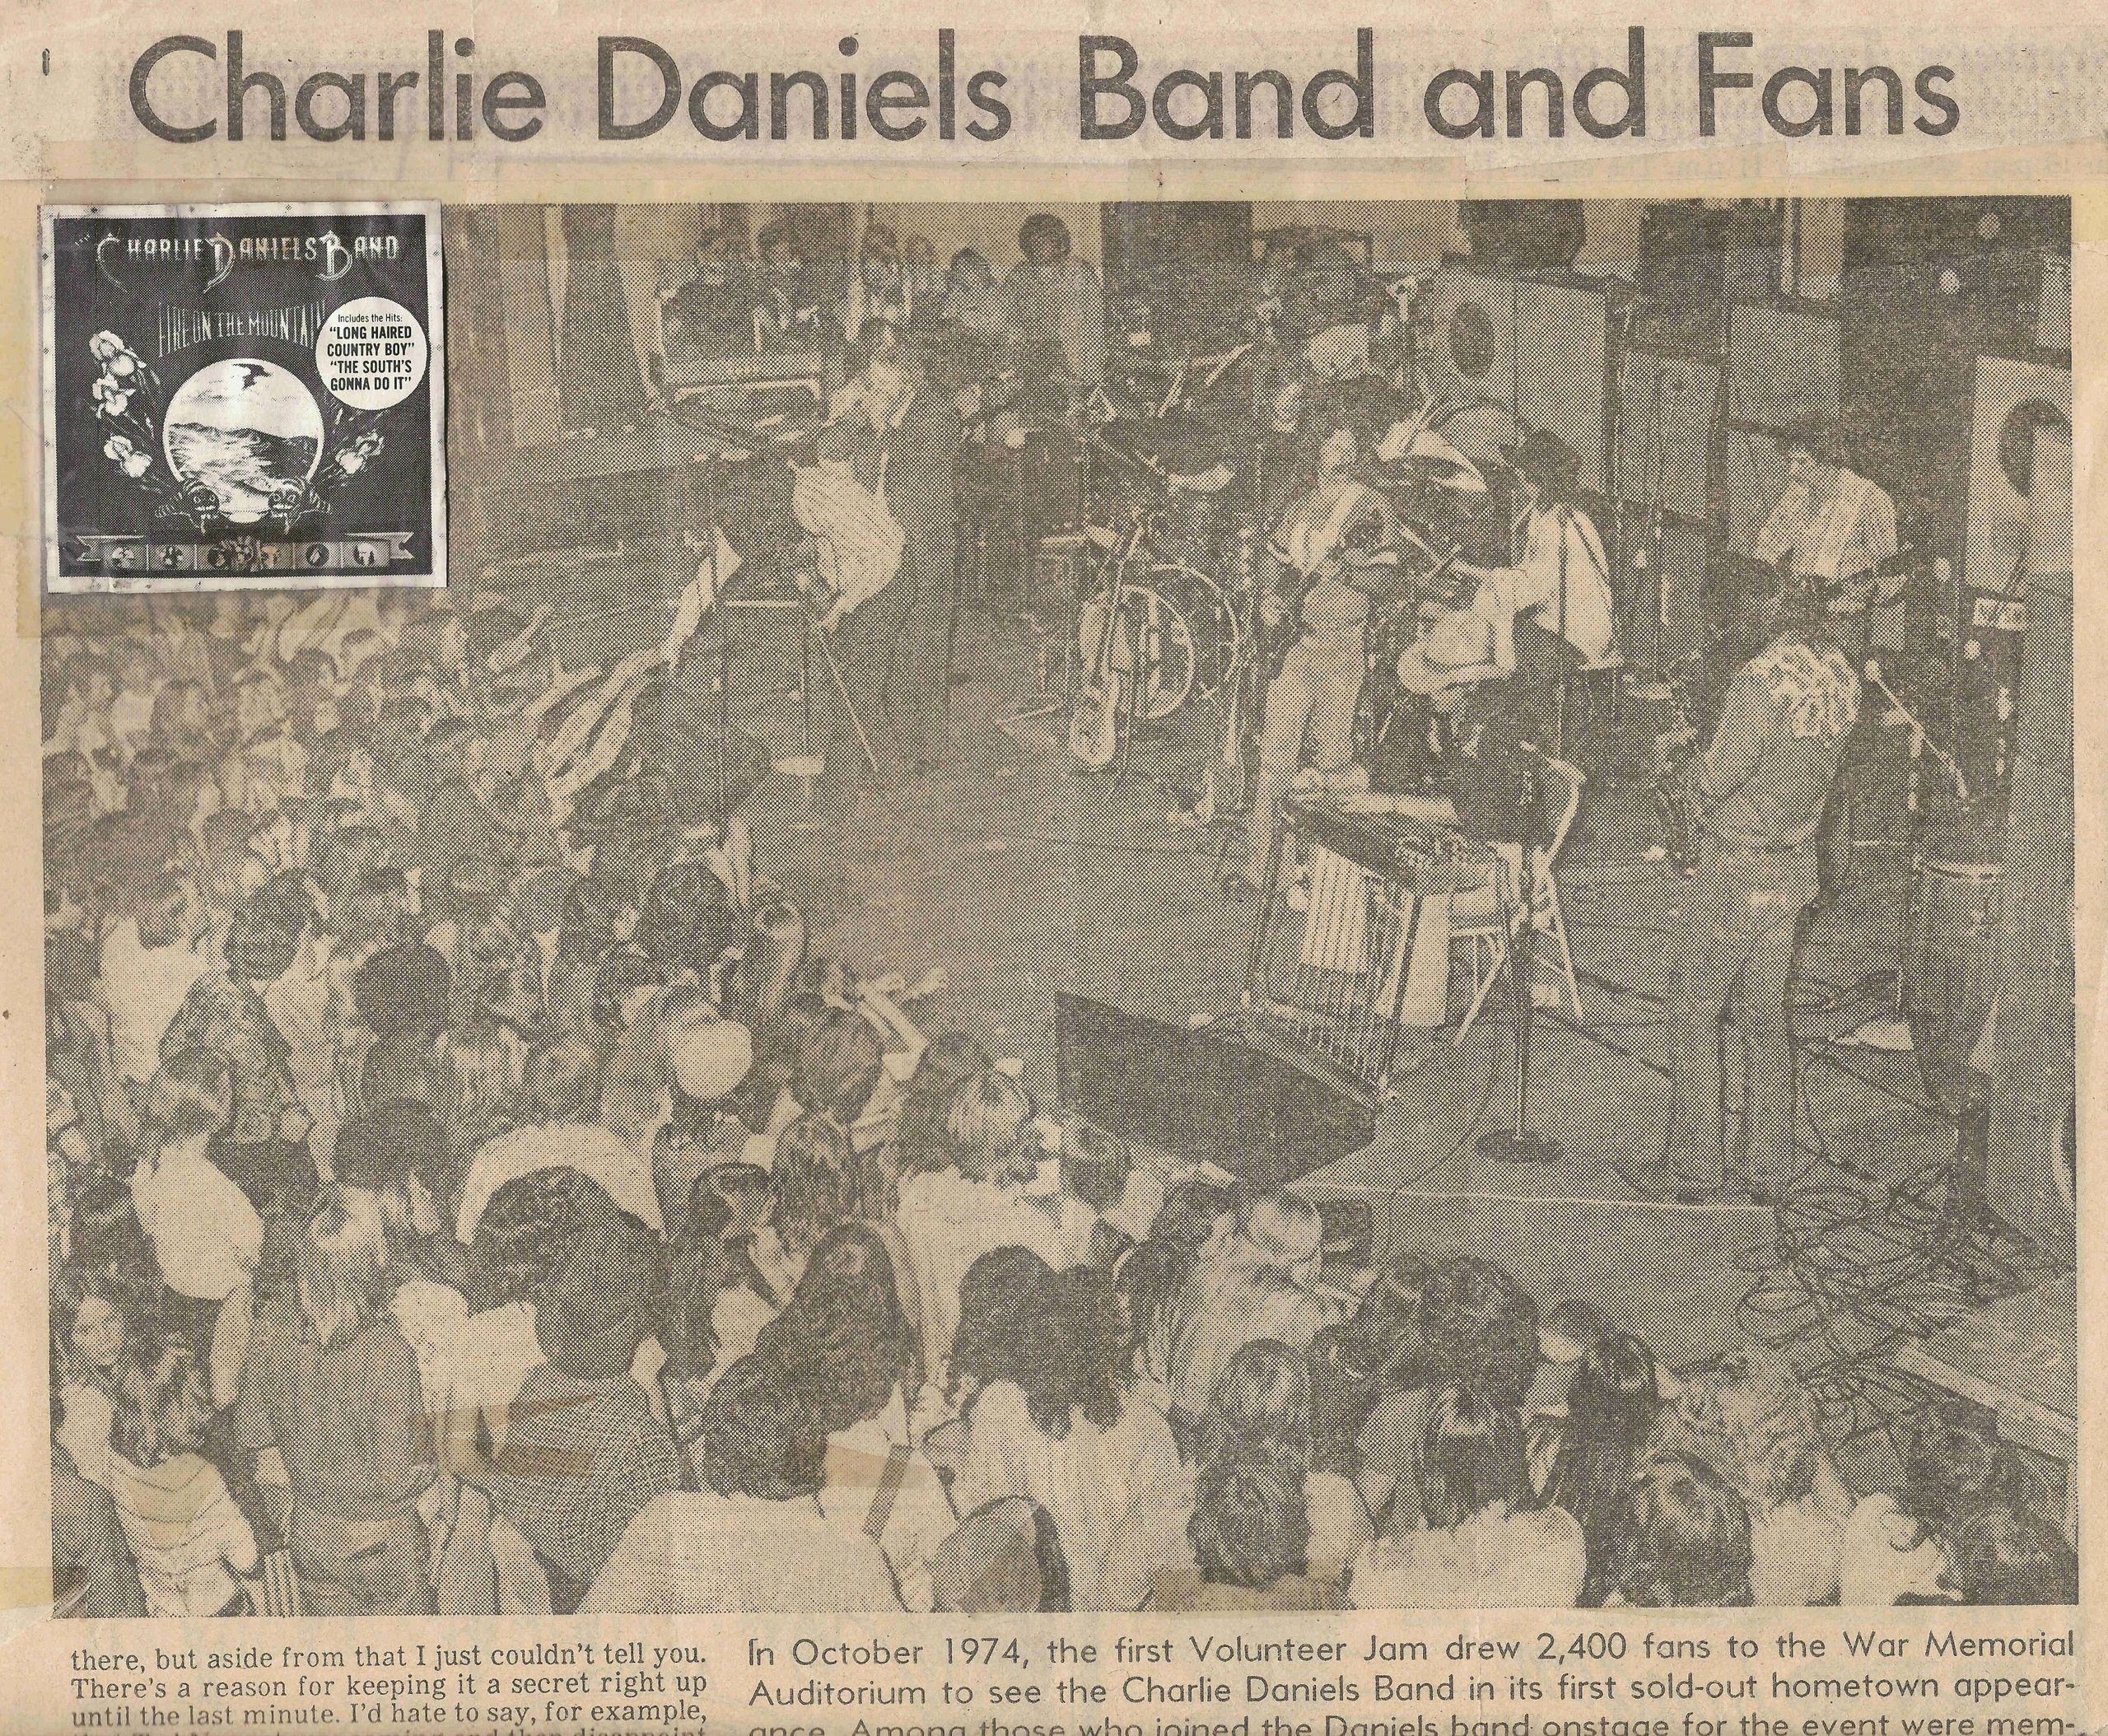 This is a newspaper picture from the first Volunteer Jam at Nashville's War Memorial Auditorium 1974